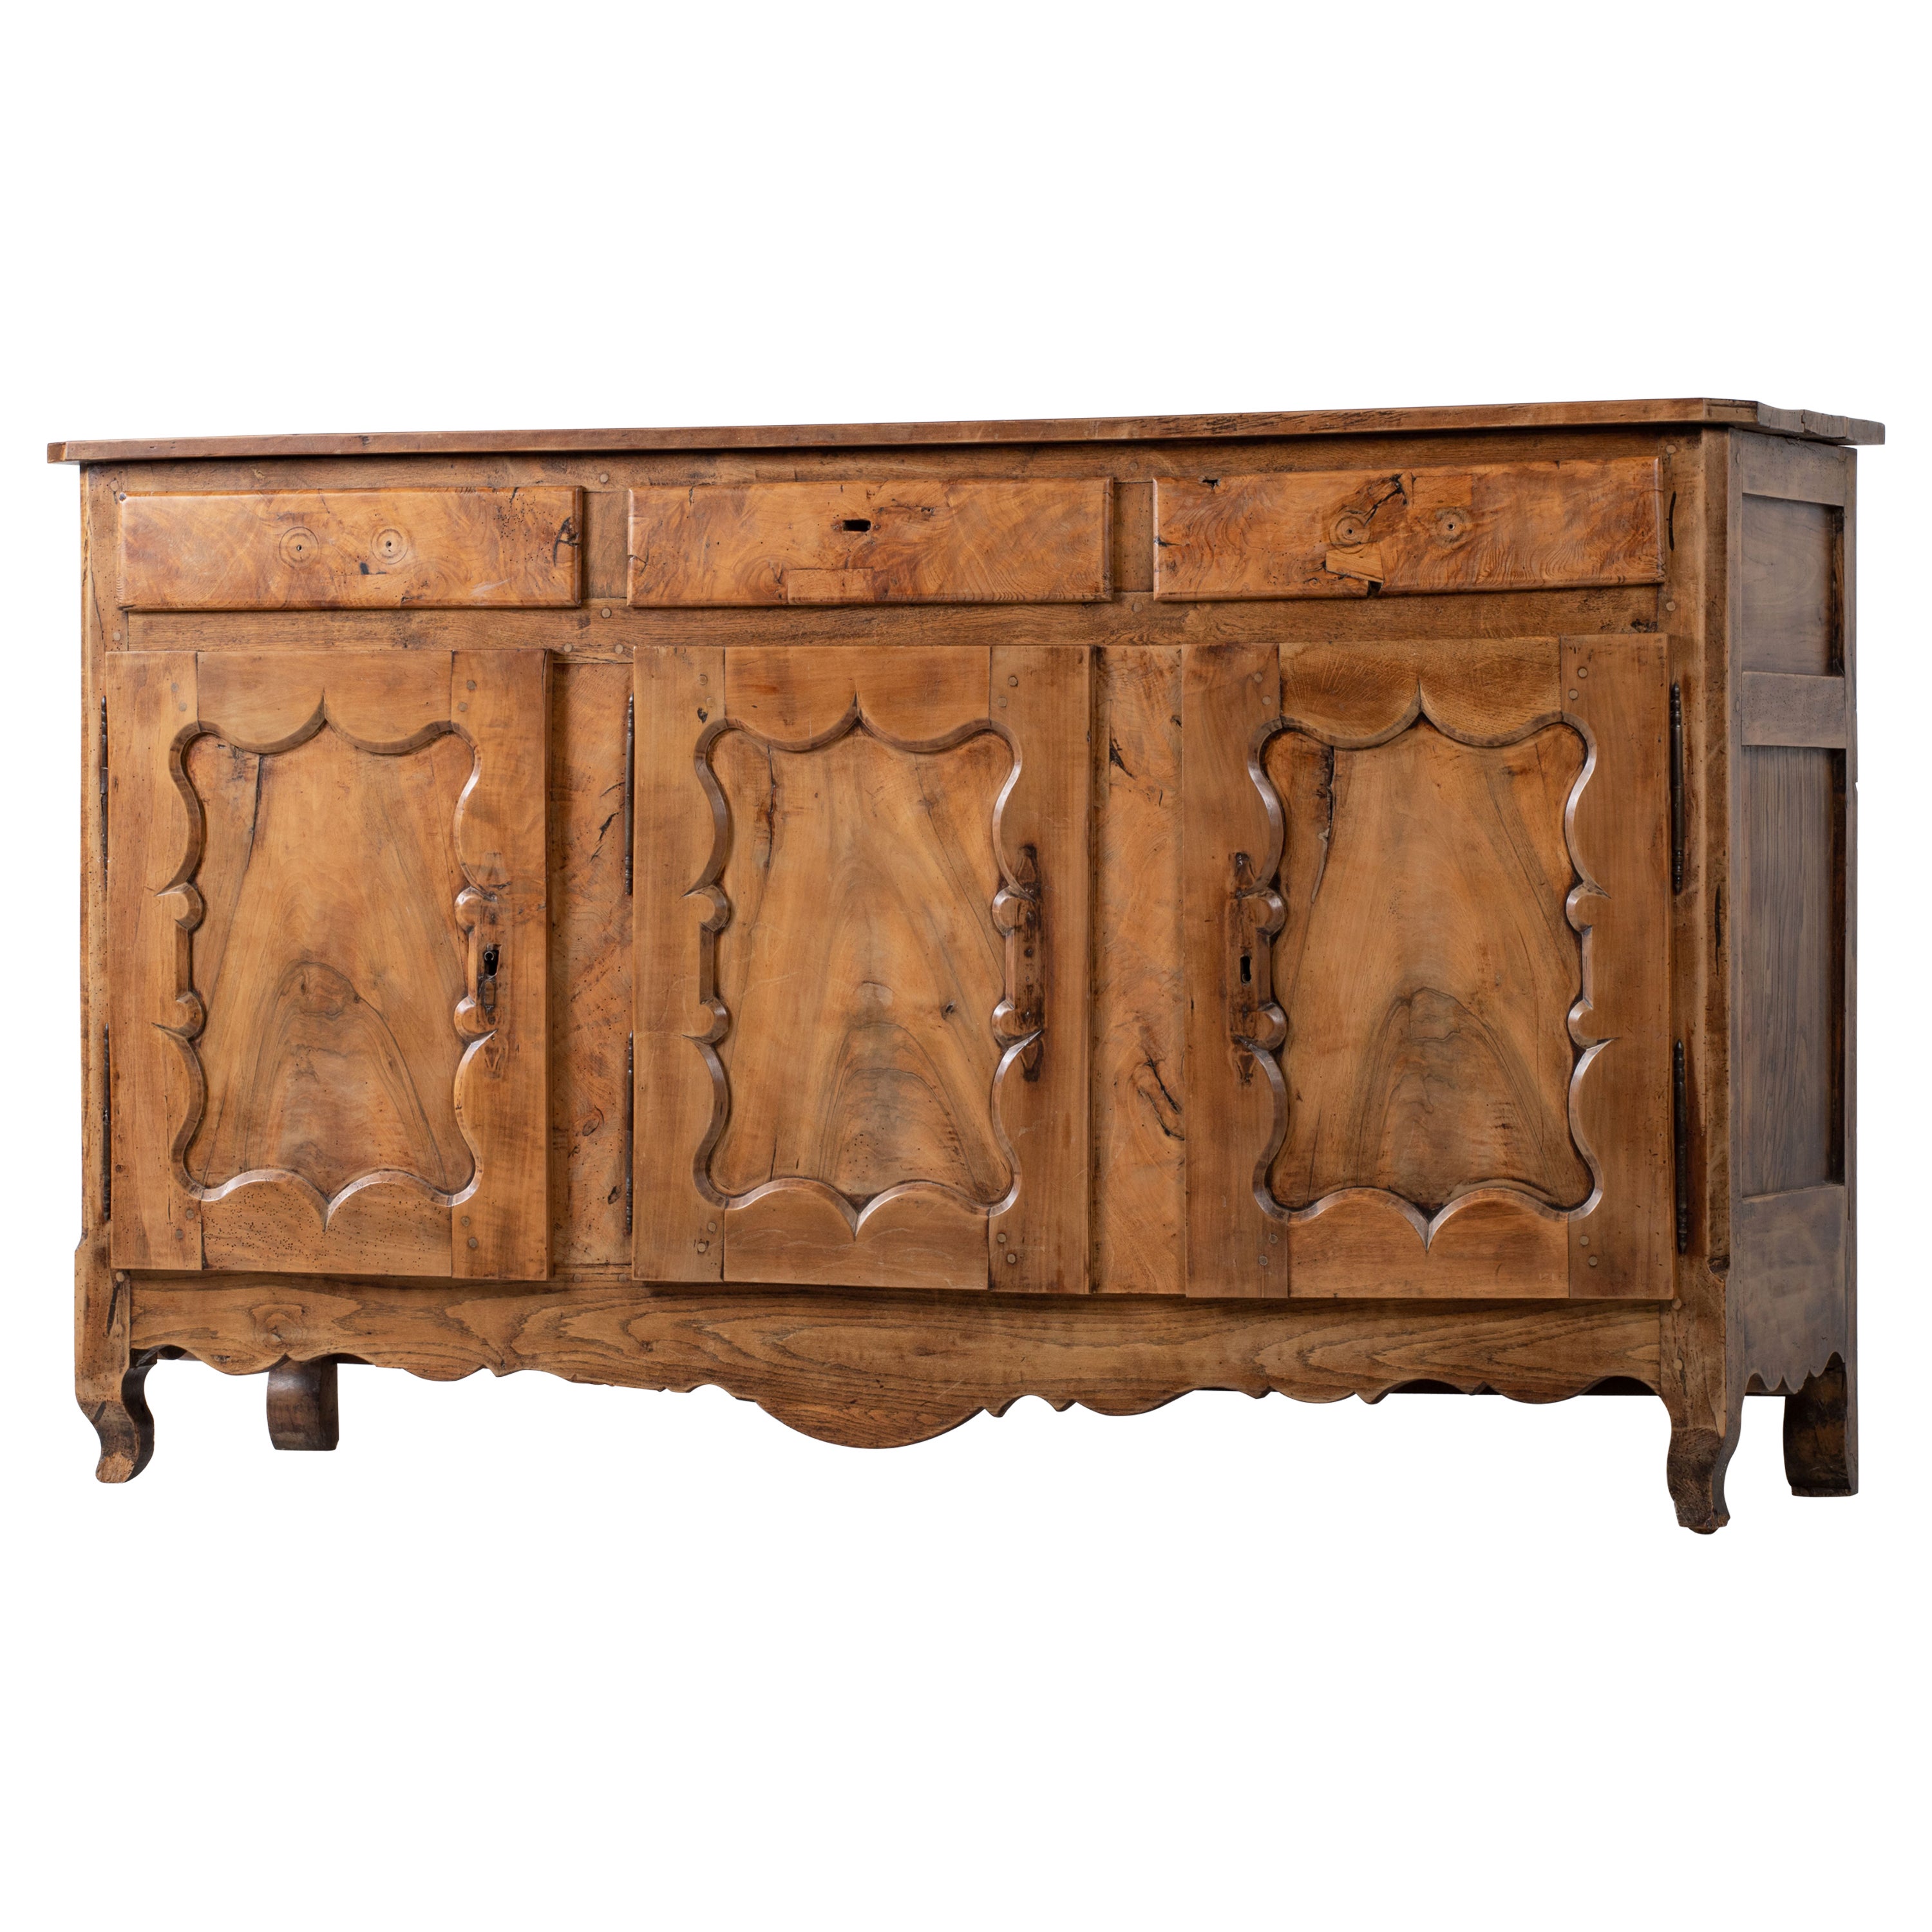 19th Century French Provencal Walnut Buffet Cabinet